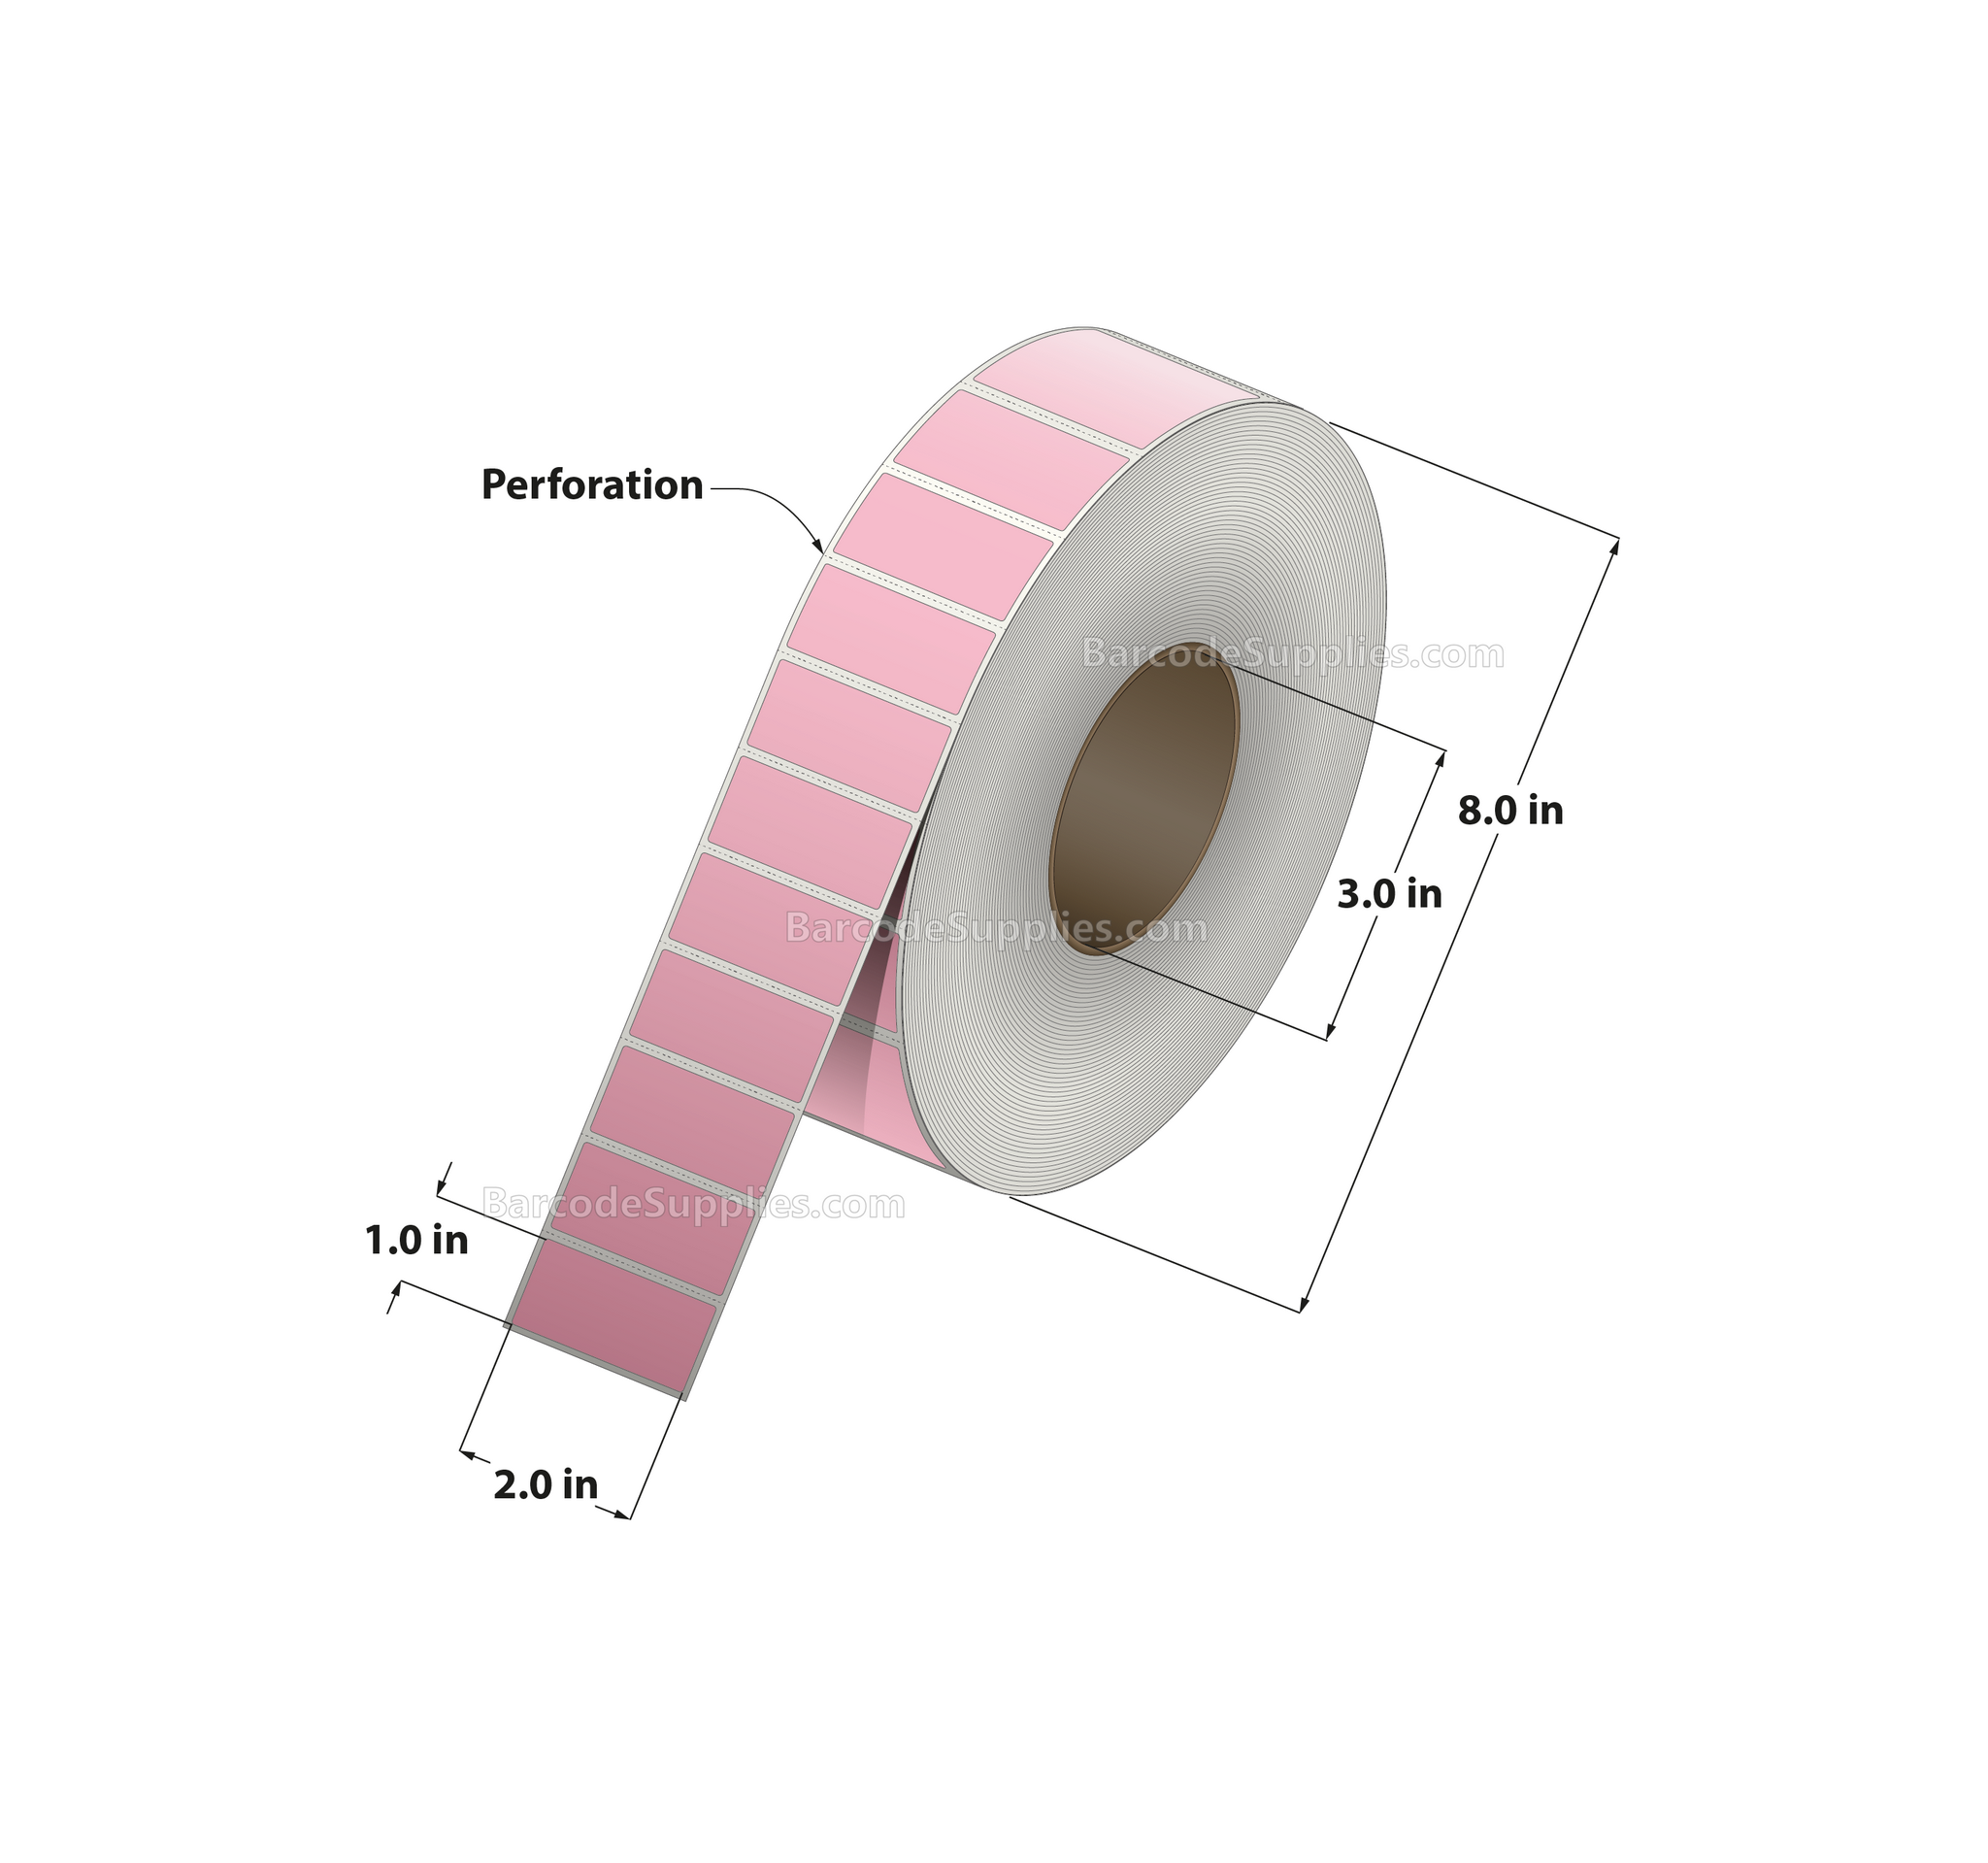 2 x 1 Thermal Transfer 176 Pink Labels With Permanent Adhesive - Perforated - 5500 Labels Per Roll - Carton Of 8 Rolls - 44000 Labels Total - MPN: RFC-2-1-5500-PK